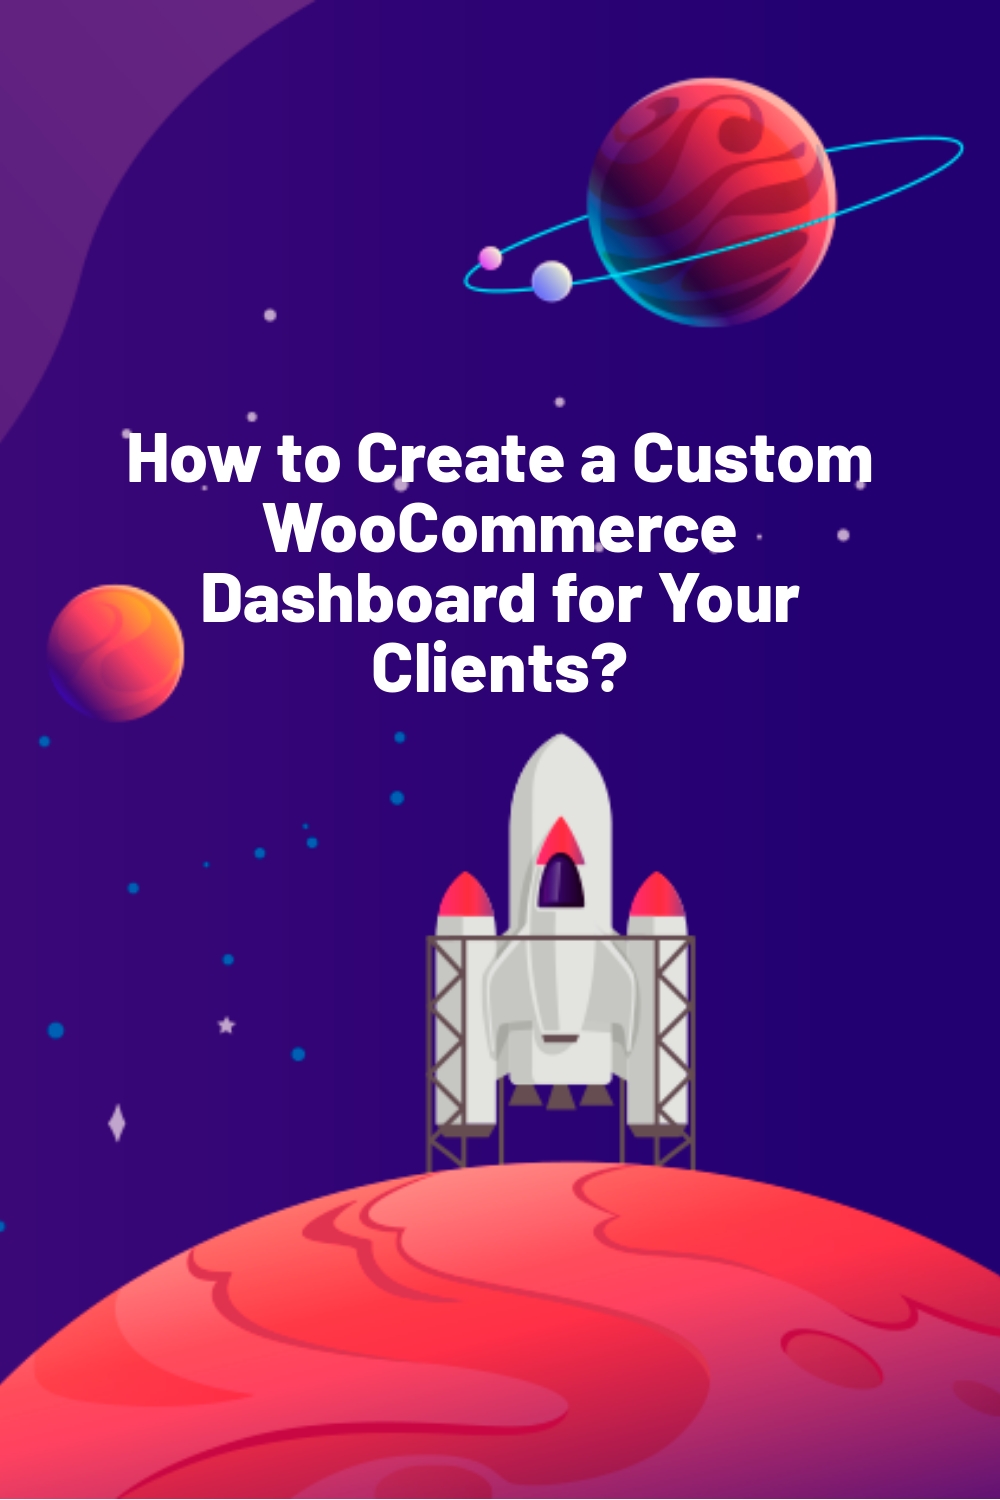 How to Create a Custom WooCommerce Dashboard for Your Clients?